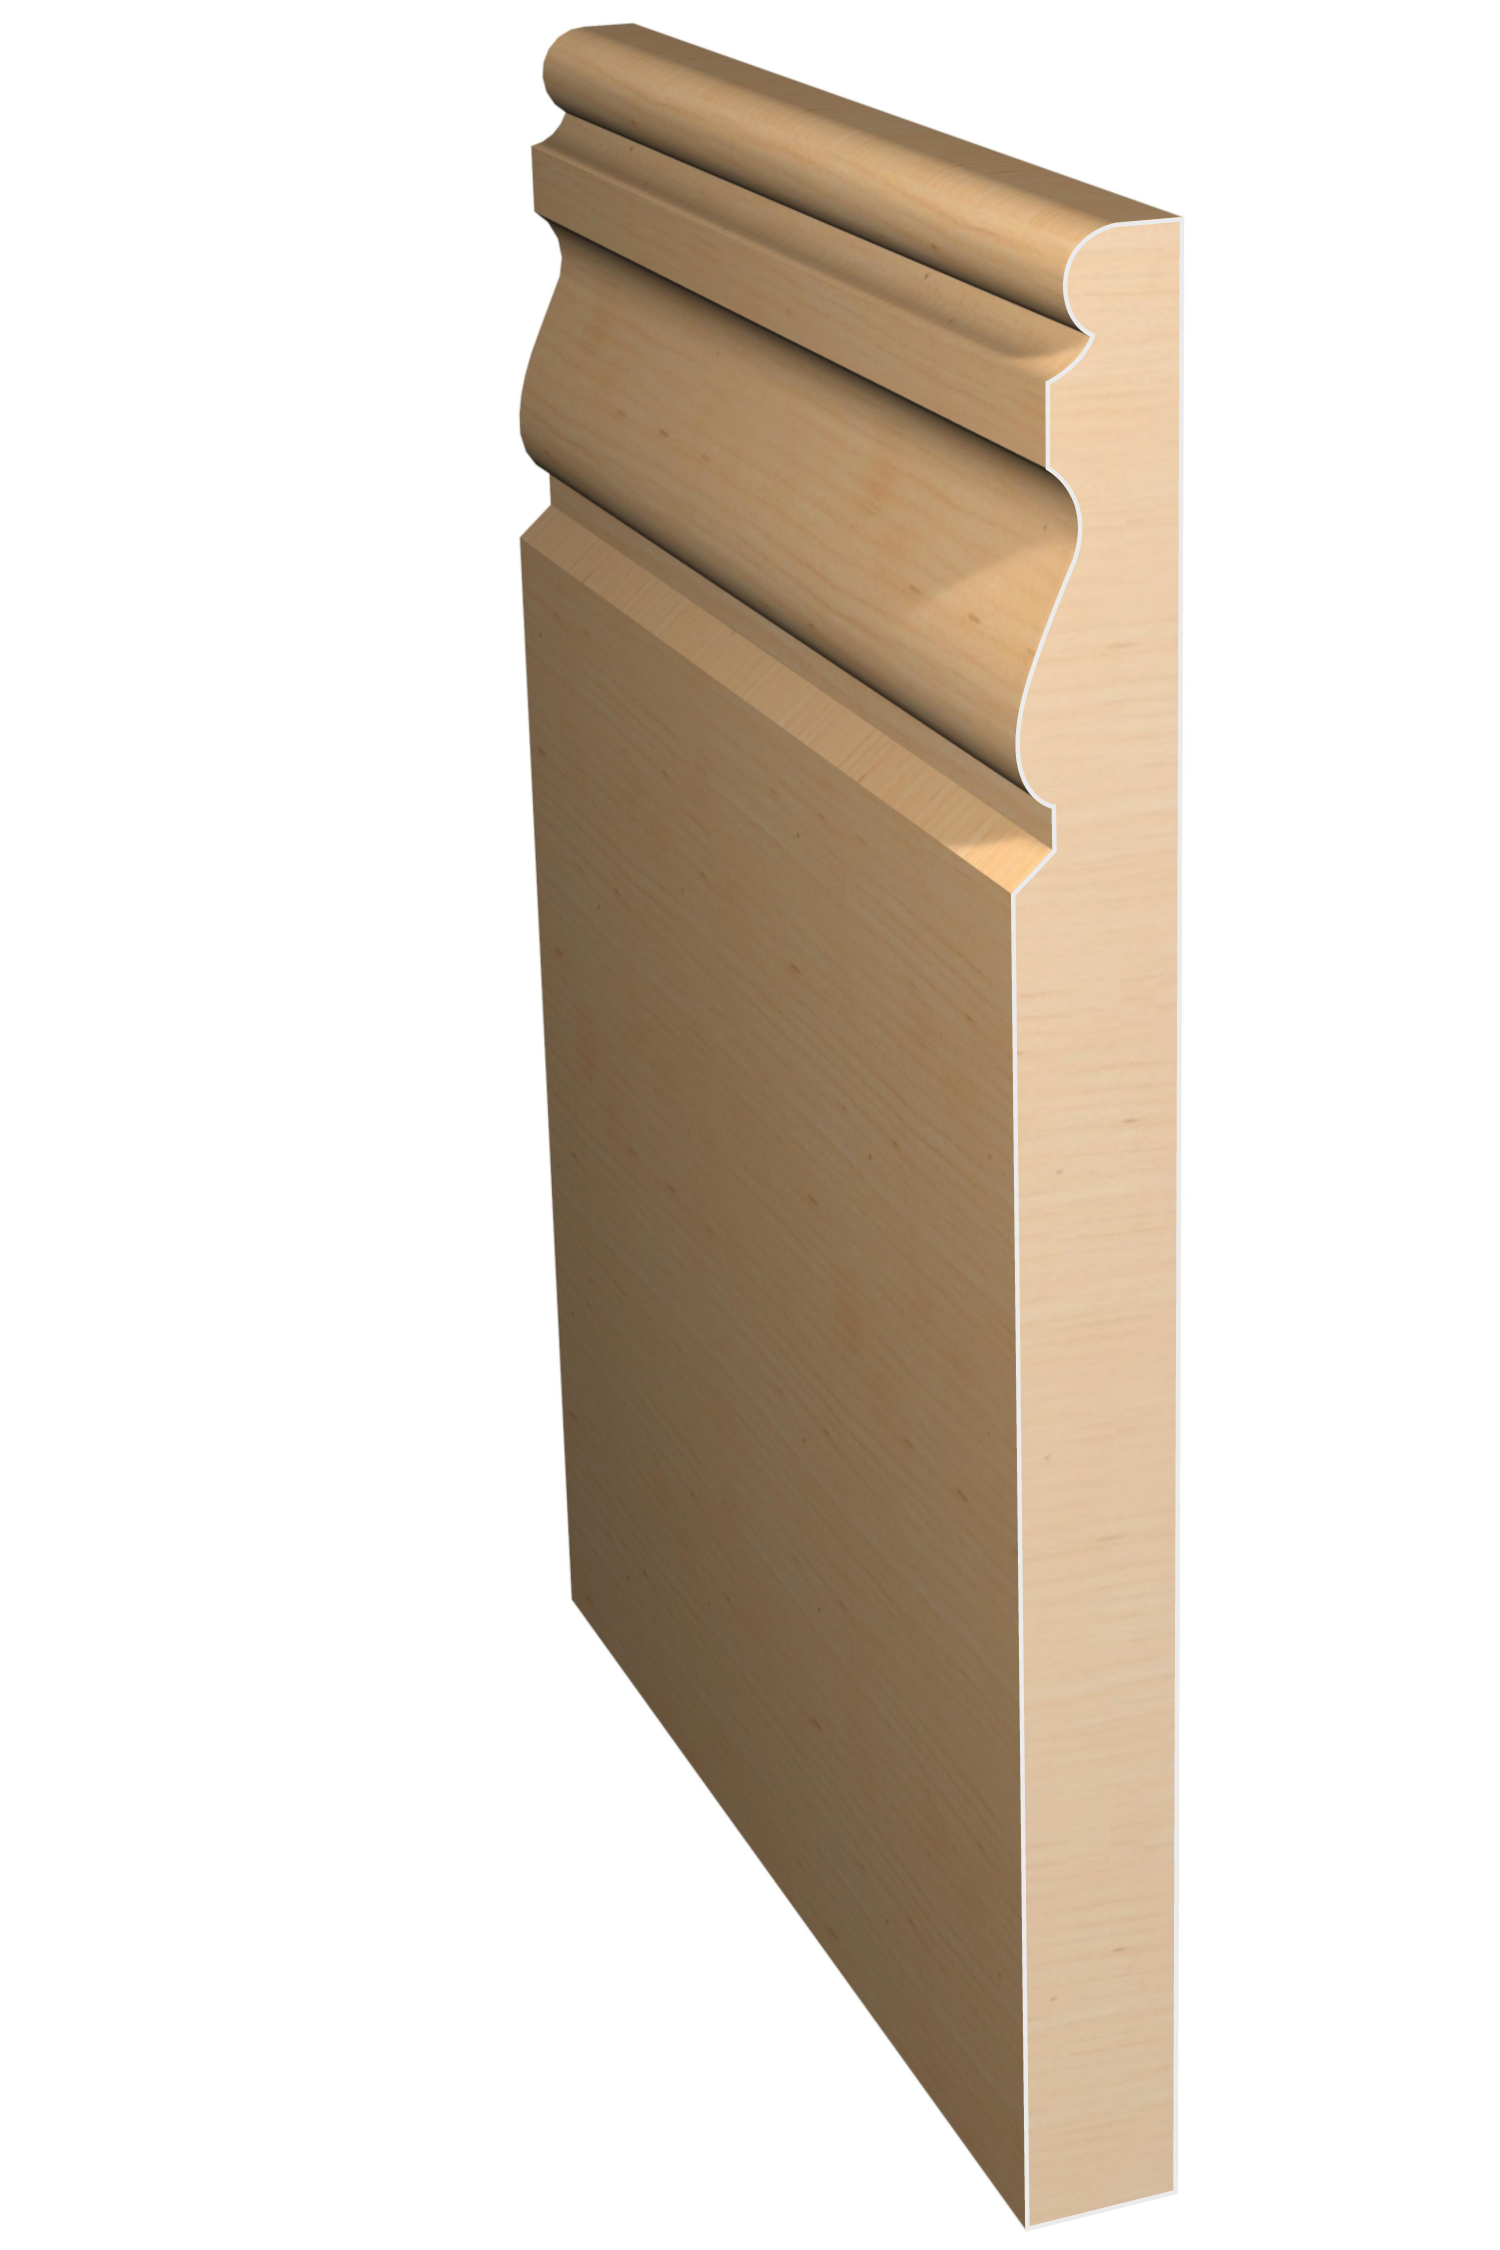 Three dimensional rendering of custom base wood molding BAPL92 made by Public Lumber Company in Detroit.